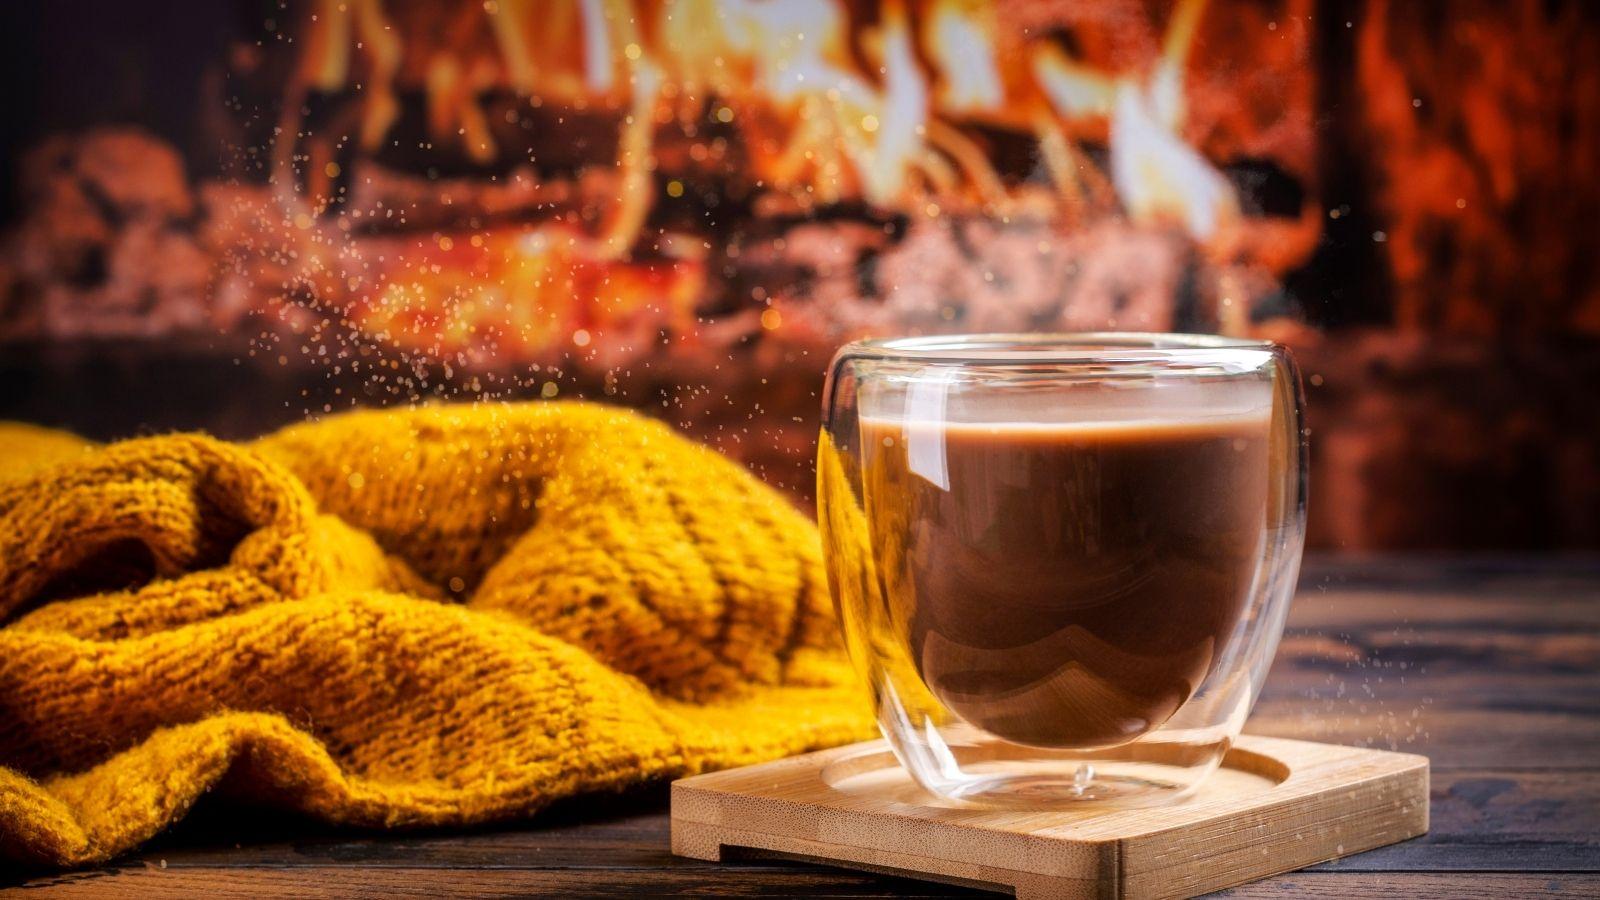 slow down and have a hot chocolate. image shows a log fire, a yellow ochre blanket and a hot chocolate in a glass